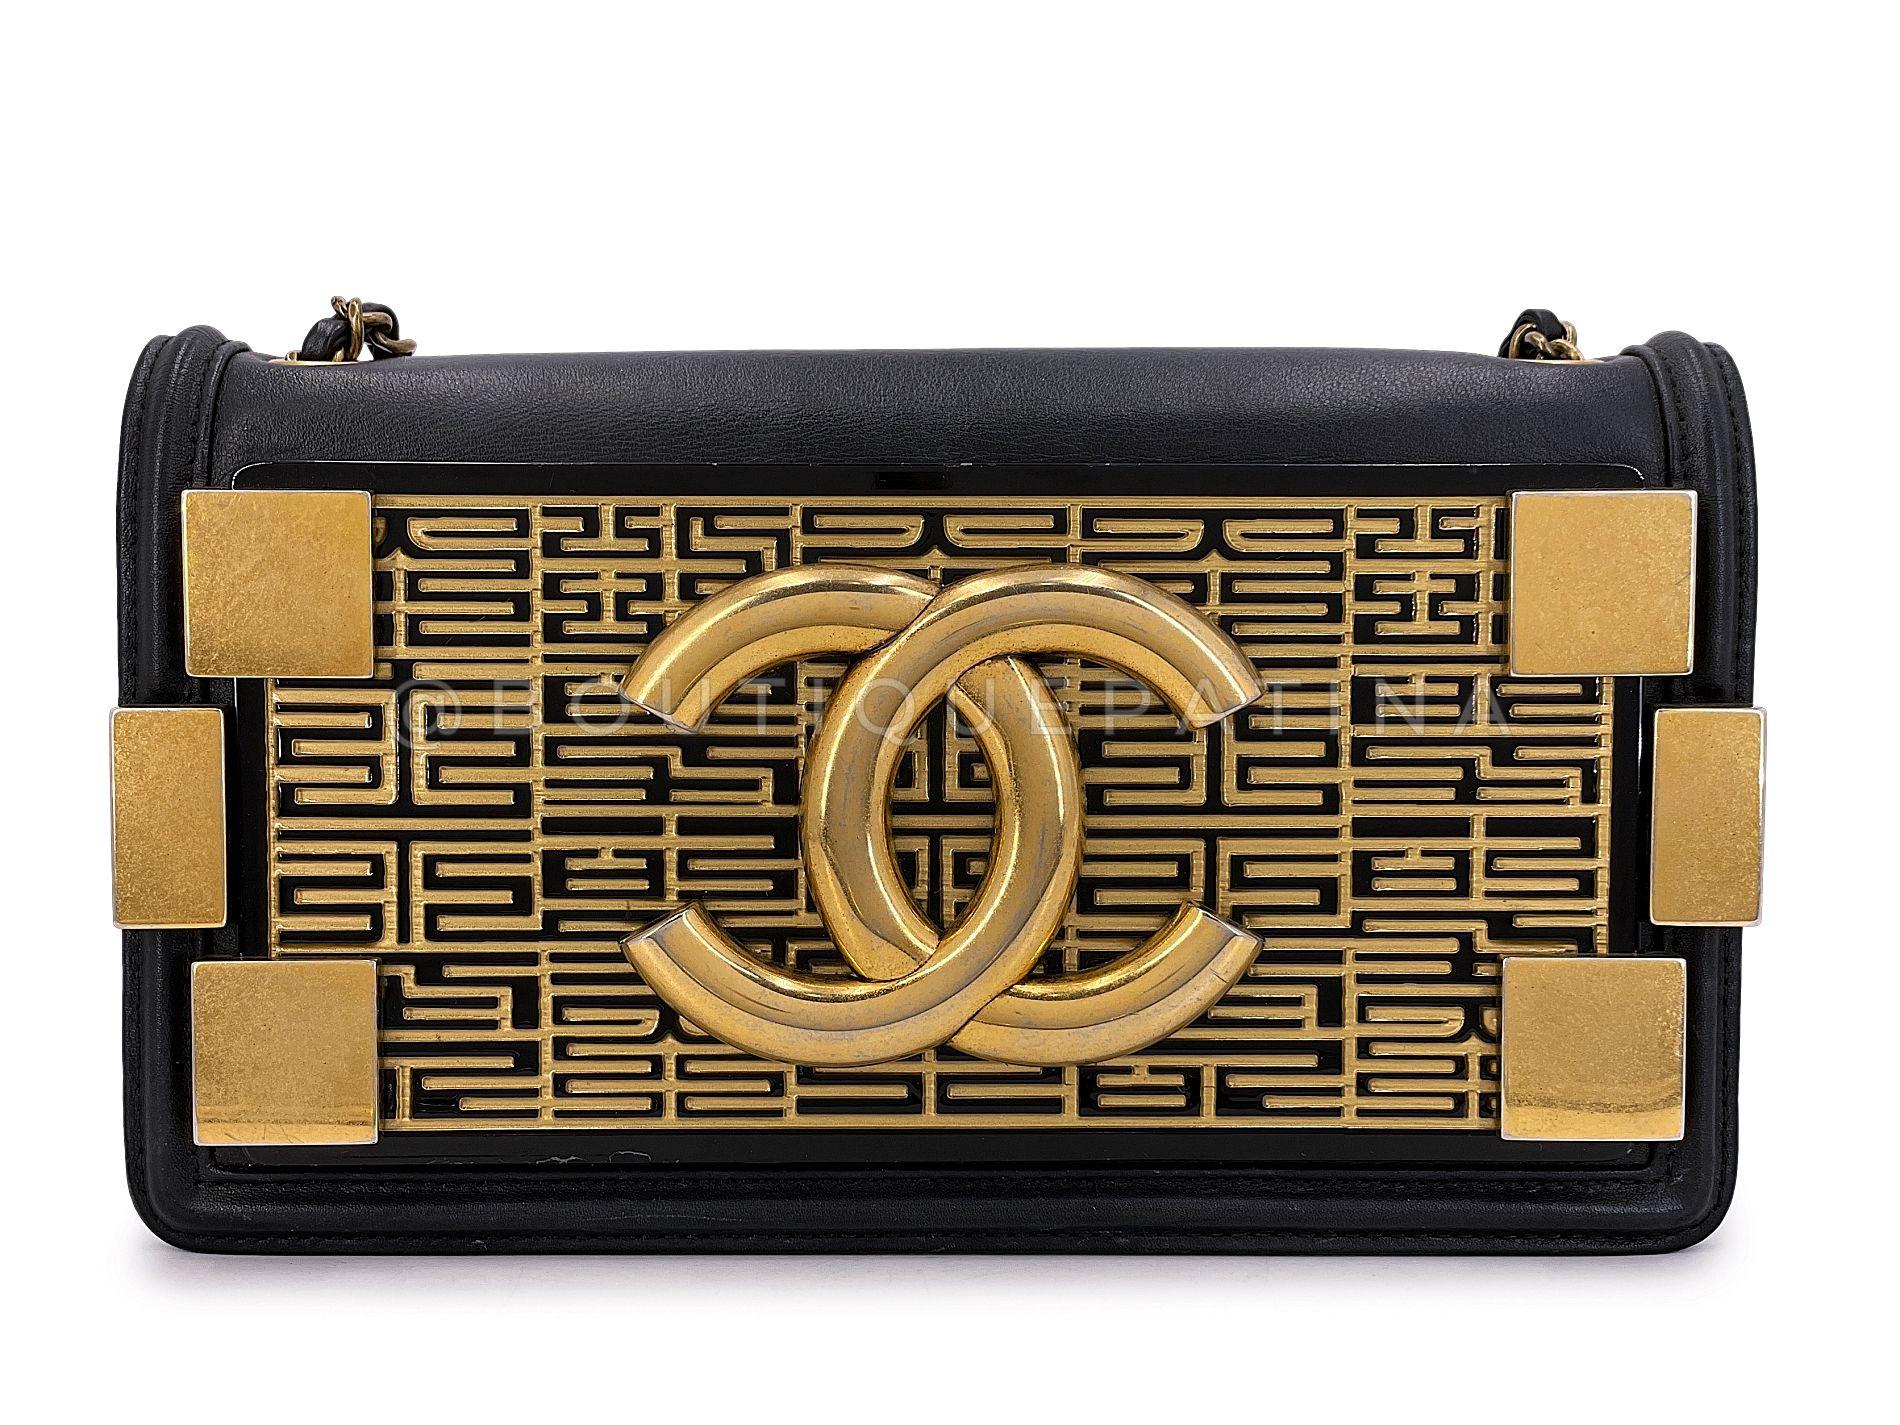 Store item: 67967
Rarely seen collectible from Lagerfeld's 2016 Paris-Seoul Cruise runway, this bag is a substantial piece - made of butter-soft lambskin base and a framed bronze hued plate with etched black enamel patterns from the Seoul